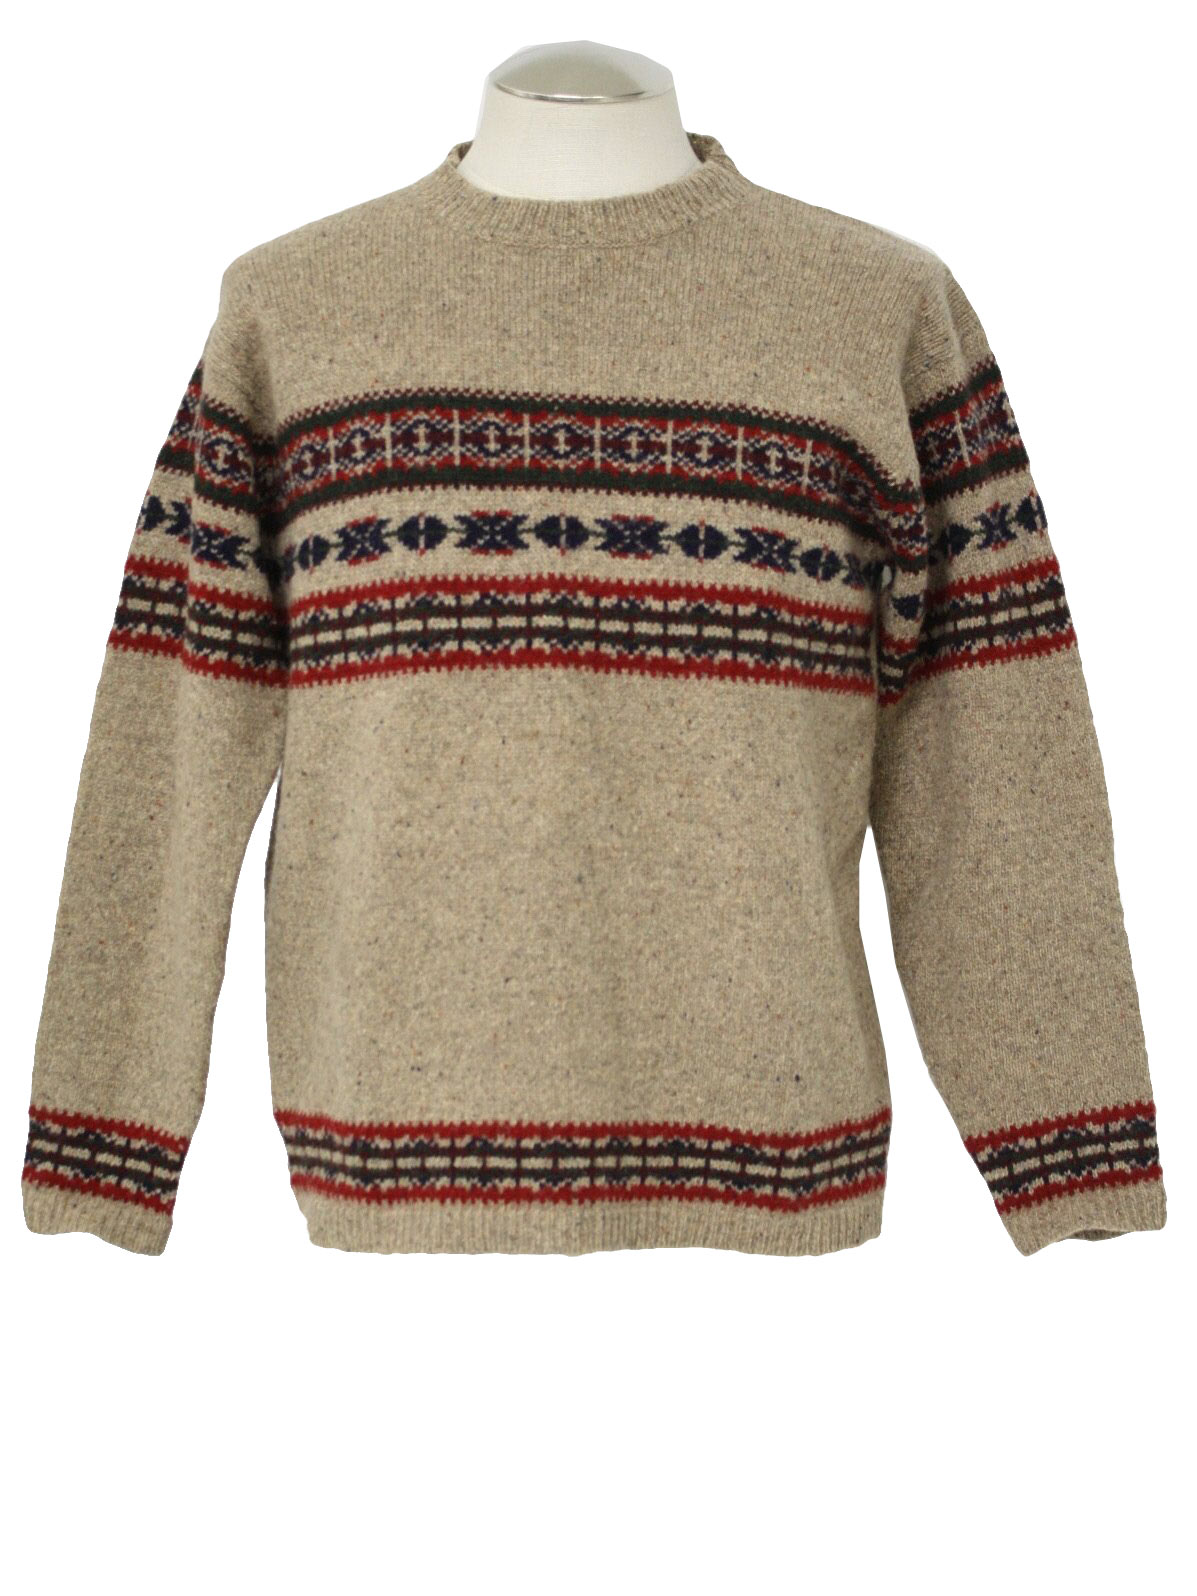 Retro 1980s Sweater: 80s -BKLE- Mens brown, red, green, and navy wool ...